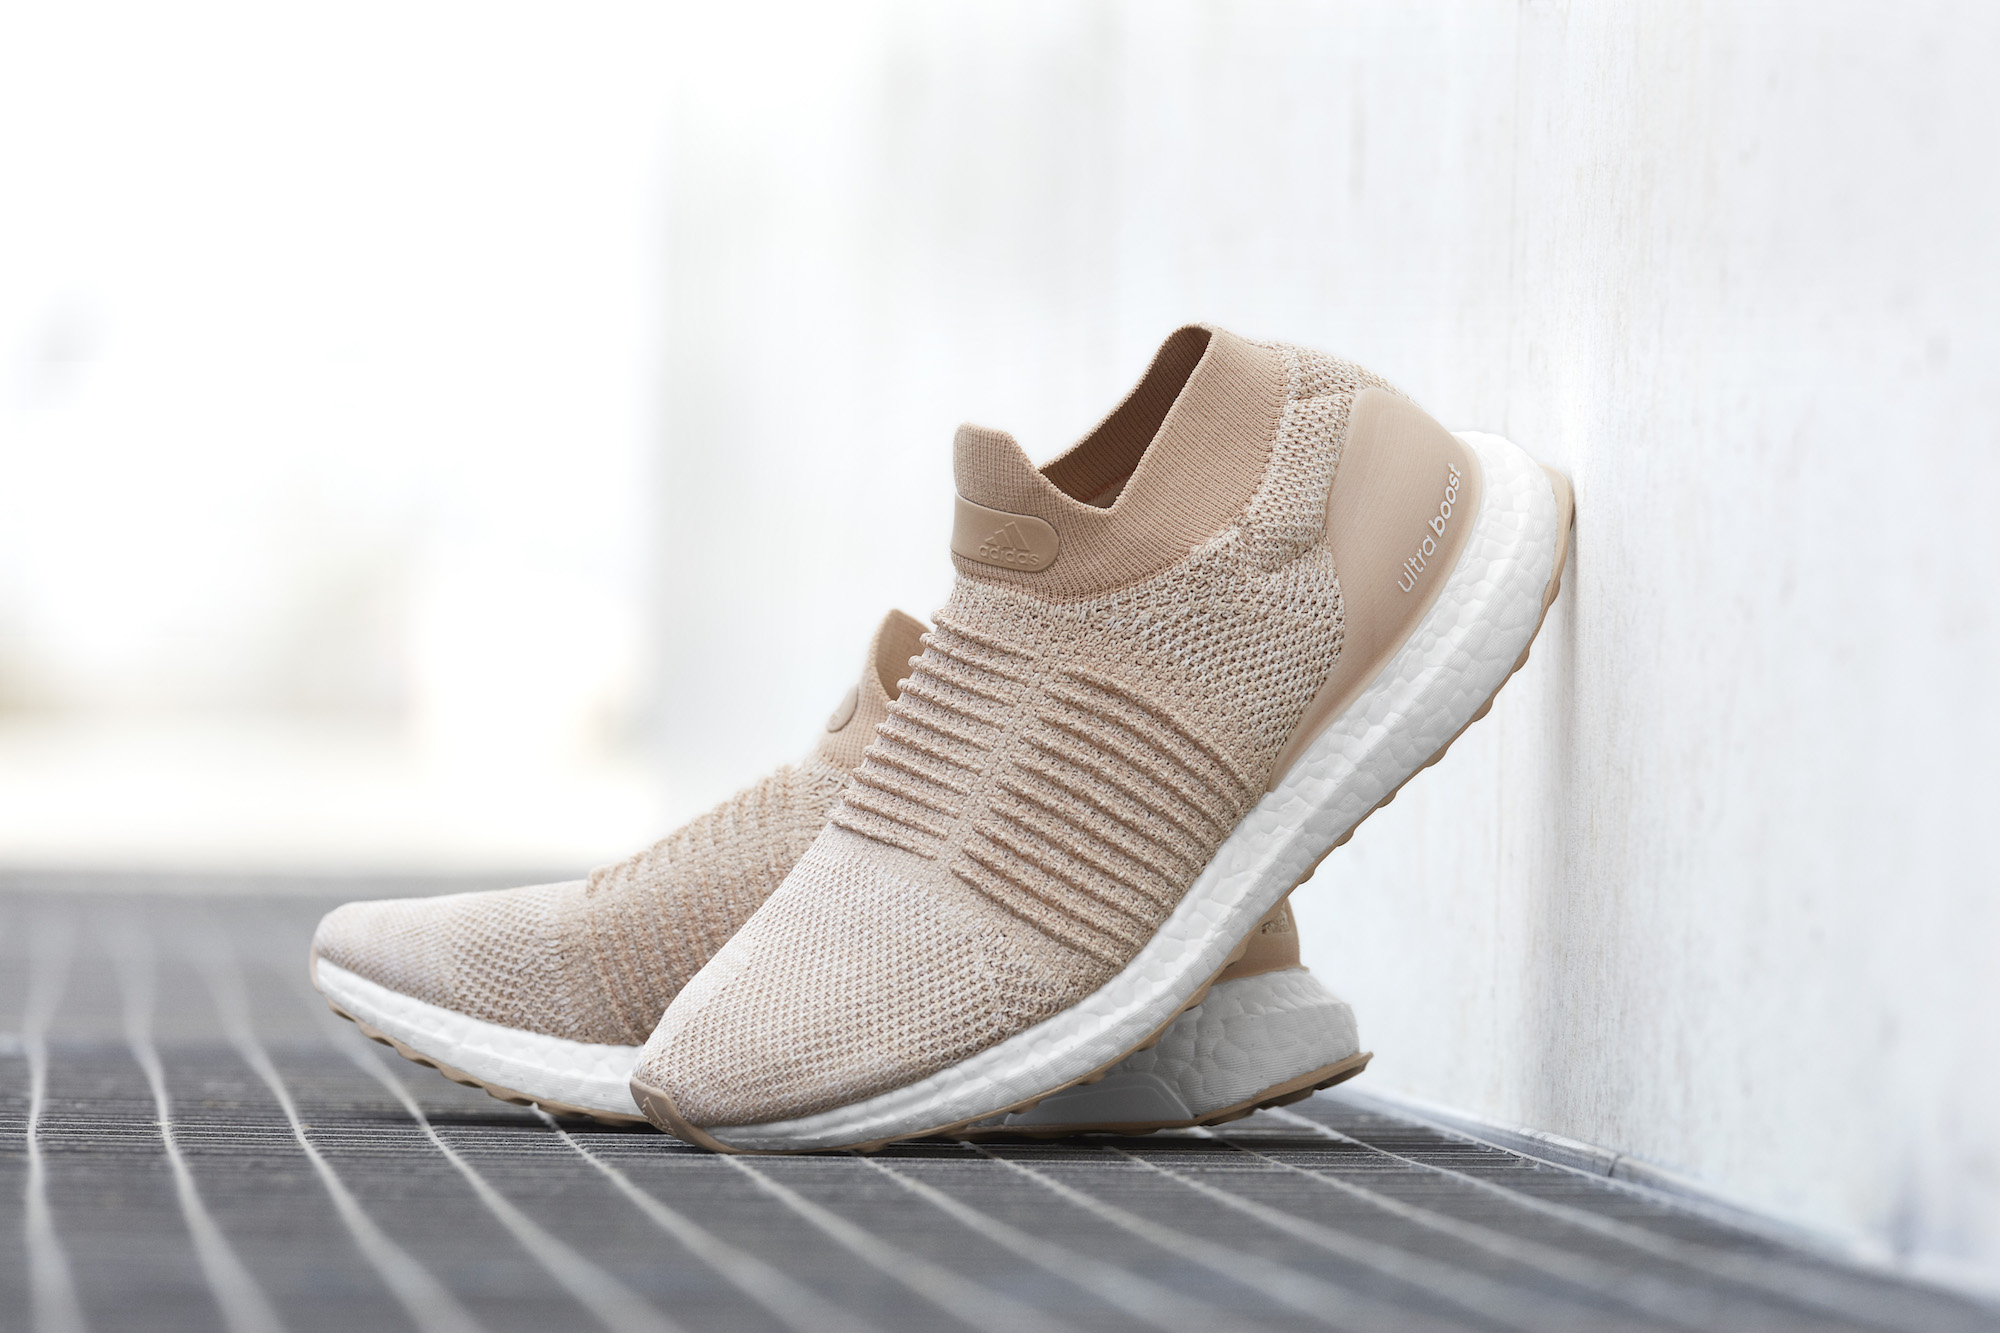 The adidas Ultra Boost Laceless is 